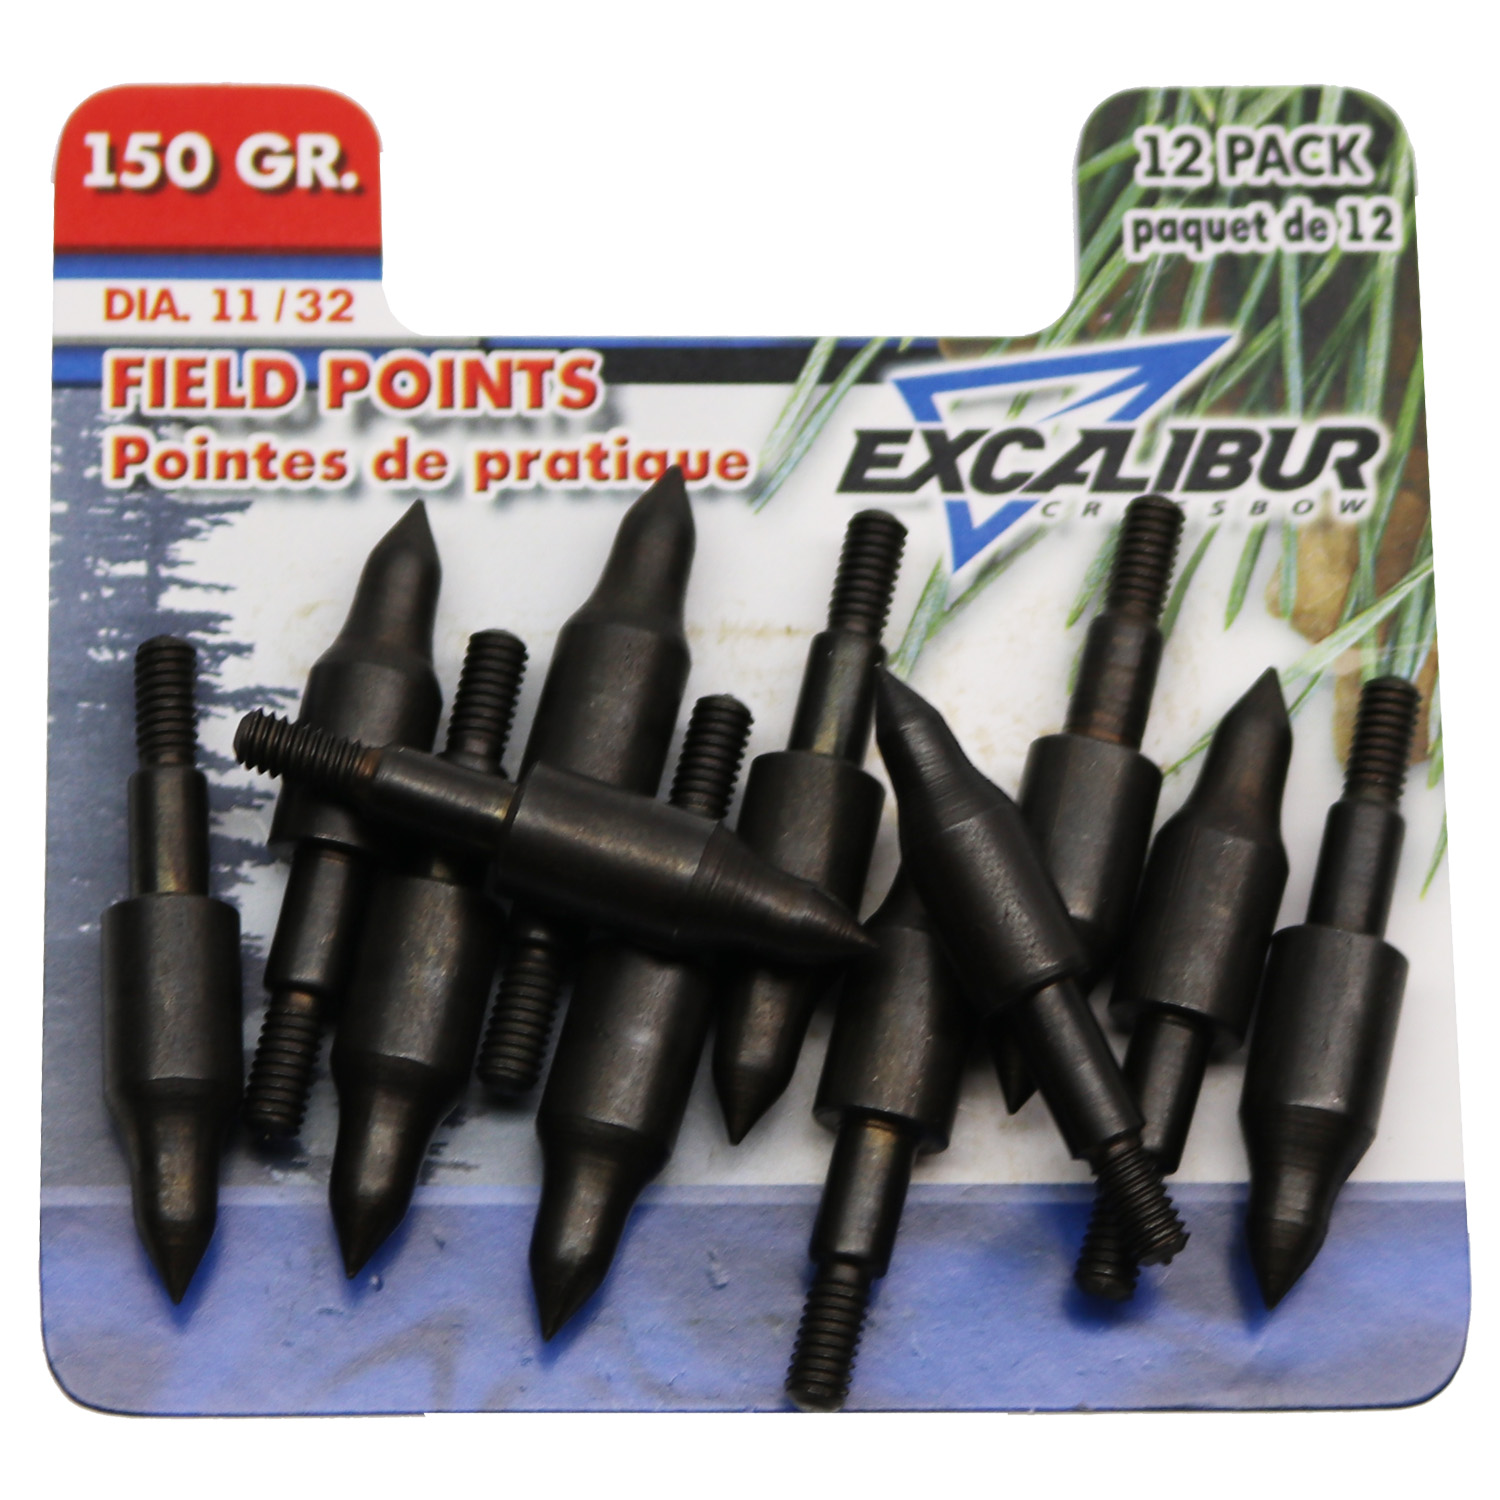 12 Count 150 gr Pack of 2 11/32 Excalibur Field Points